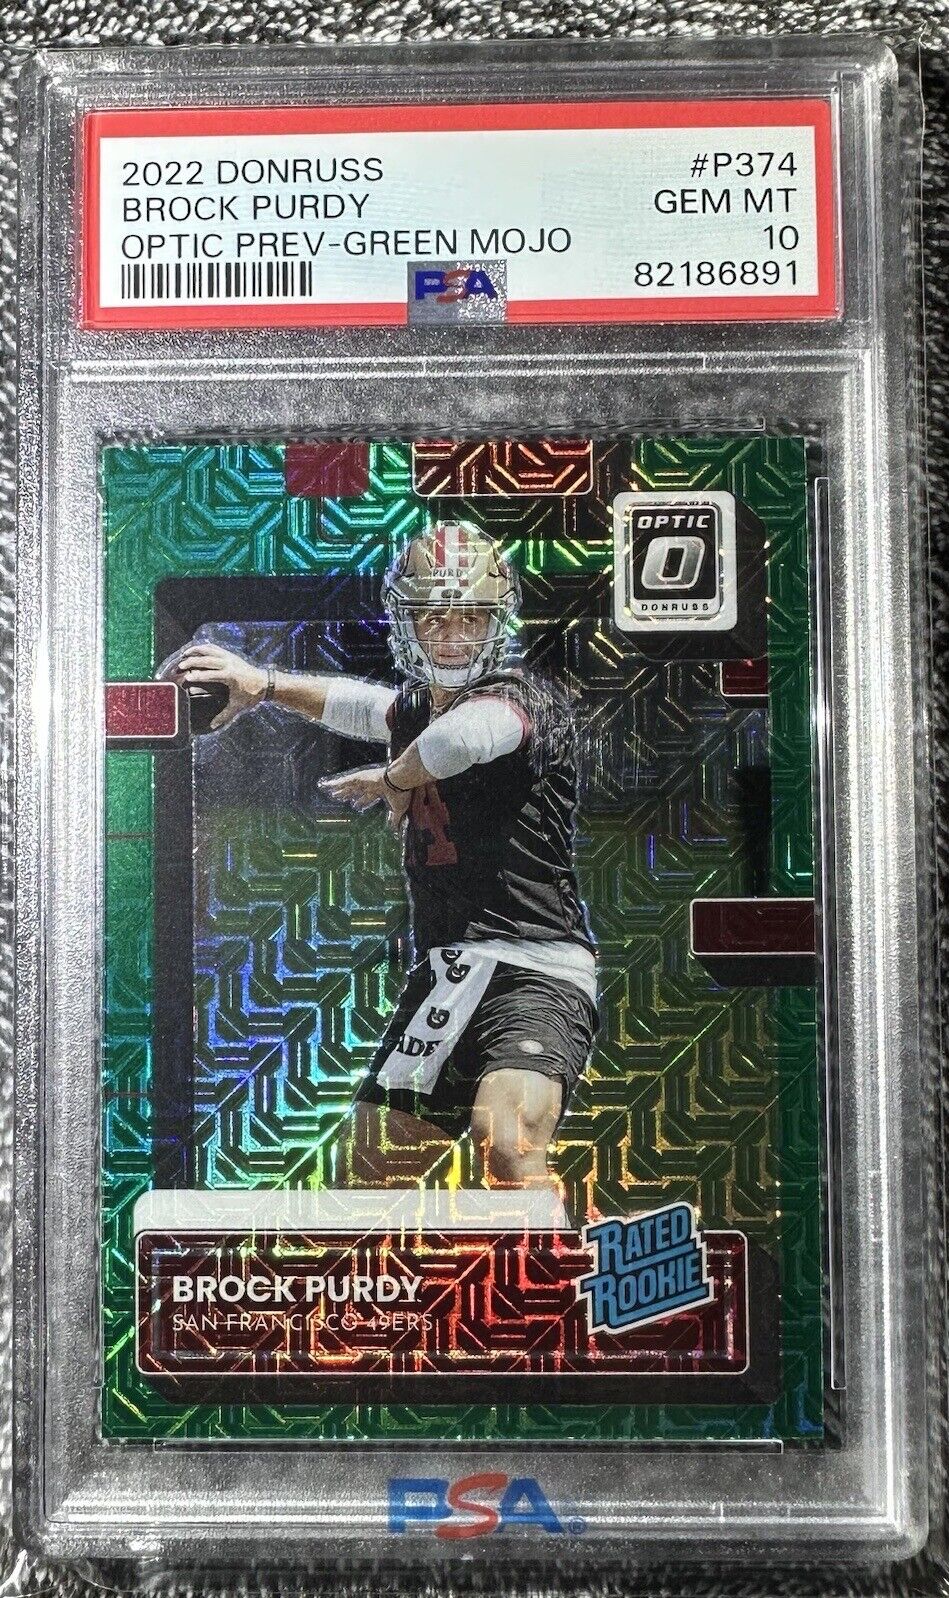 2022 Donruss Brock Purdy Rated Rookie Optic Preview - Green Mojo PSA 10.  POP 15